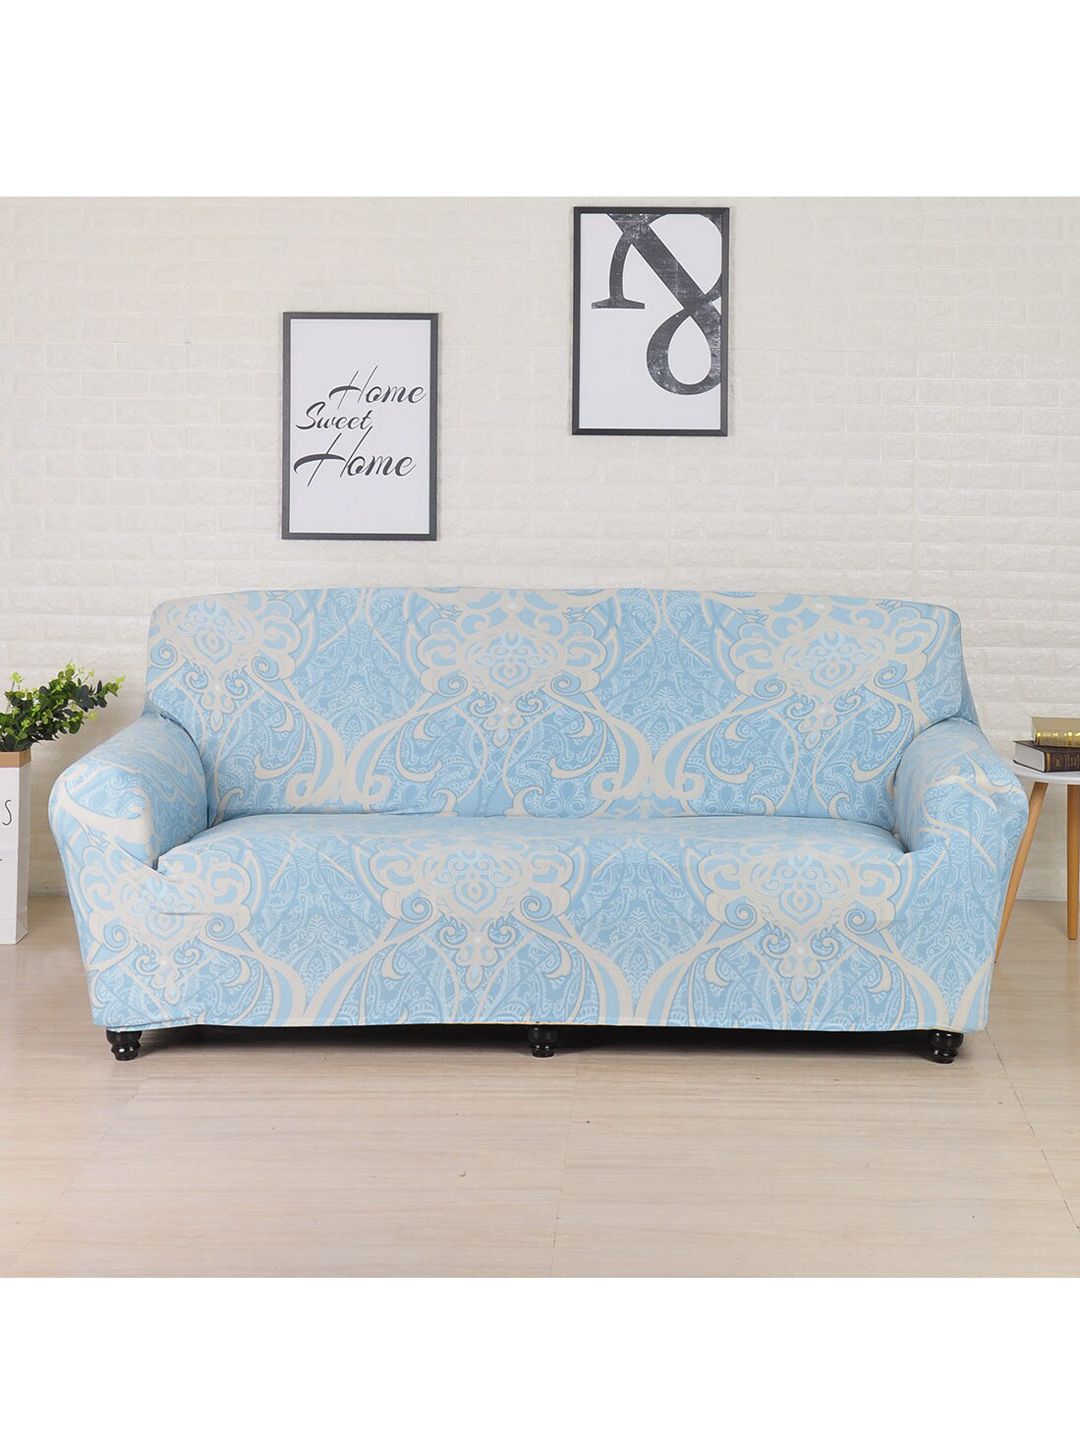 Athome by Nilkamal Blue & White Printed 3 Seater Sofa Covers Price in India